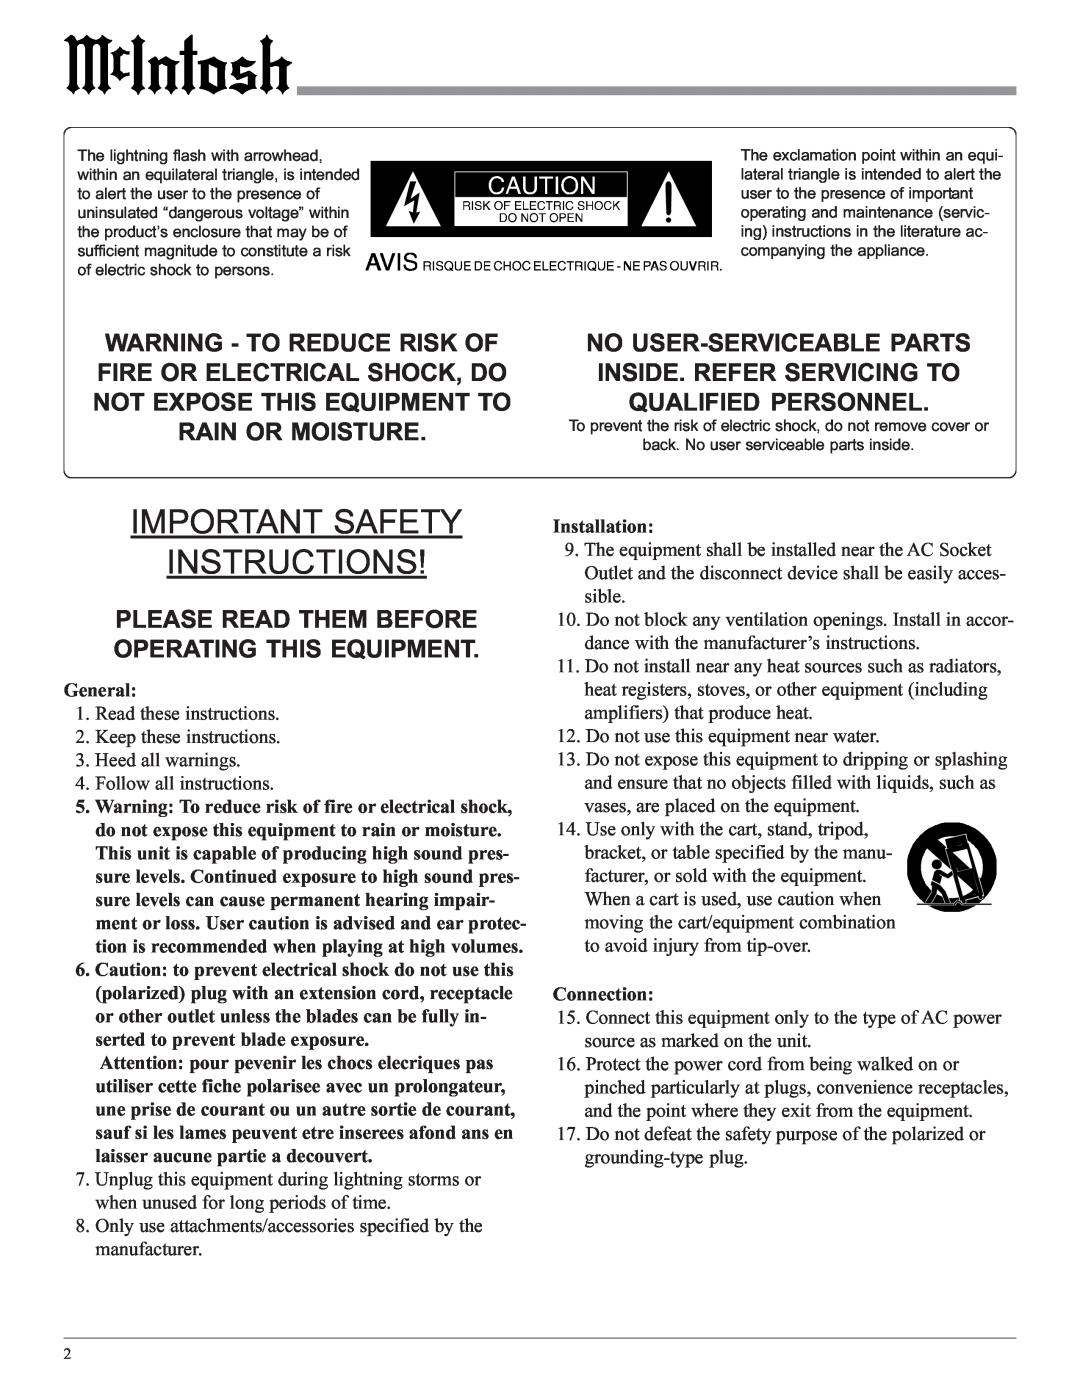 McIntosh MC1201 manual Important Safety Instructions, Please Read Them Before Operating This Equipment 